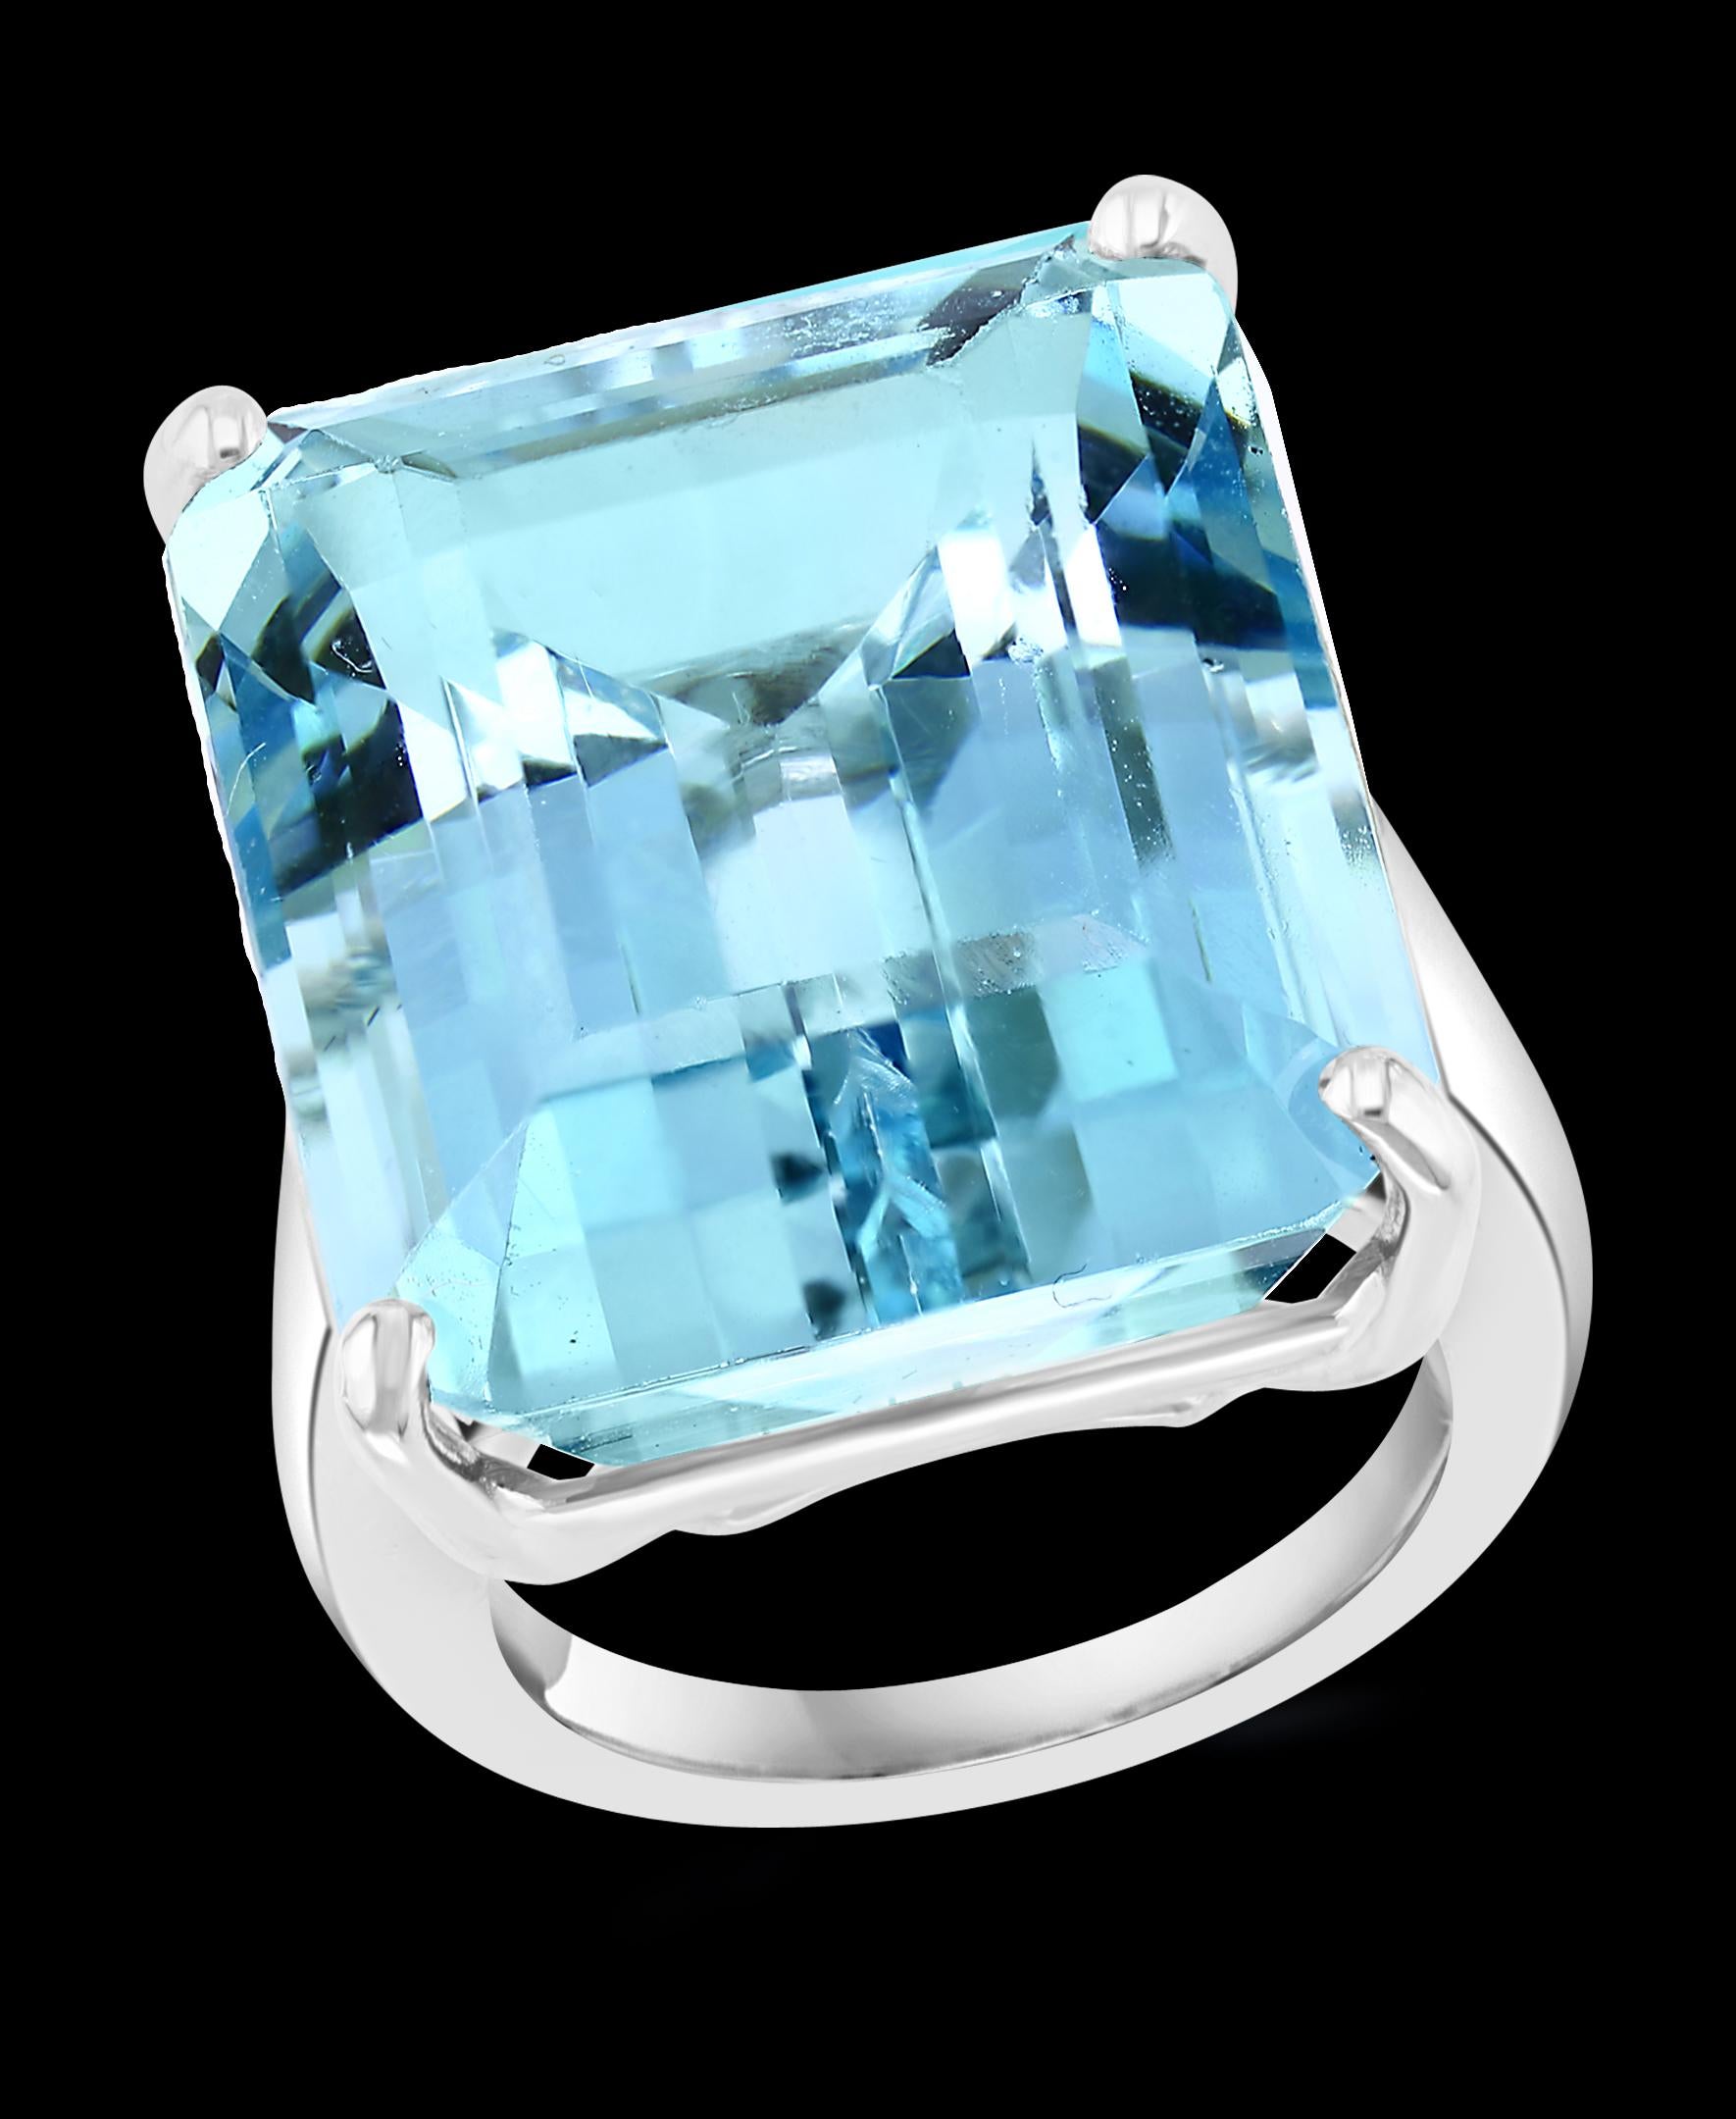 Octagon Cut GIA Certified 35.93 Ct  Octagonal Step Cut  Aquamarine Cocktail Ring Platinum  For Sale